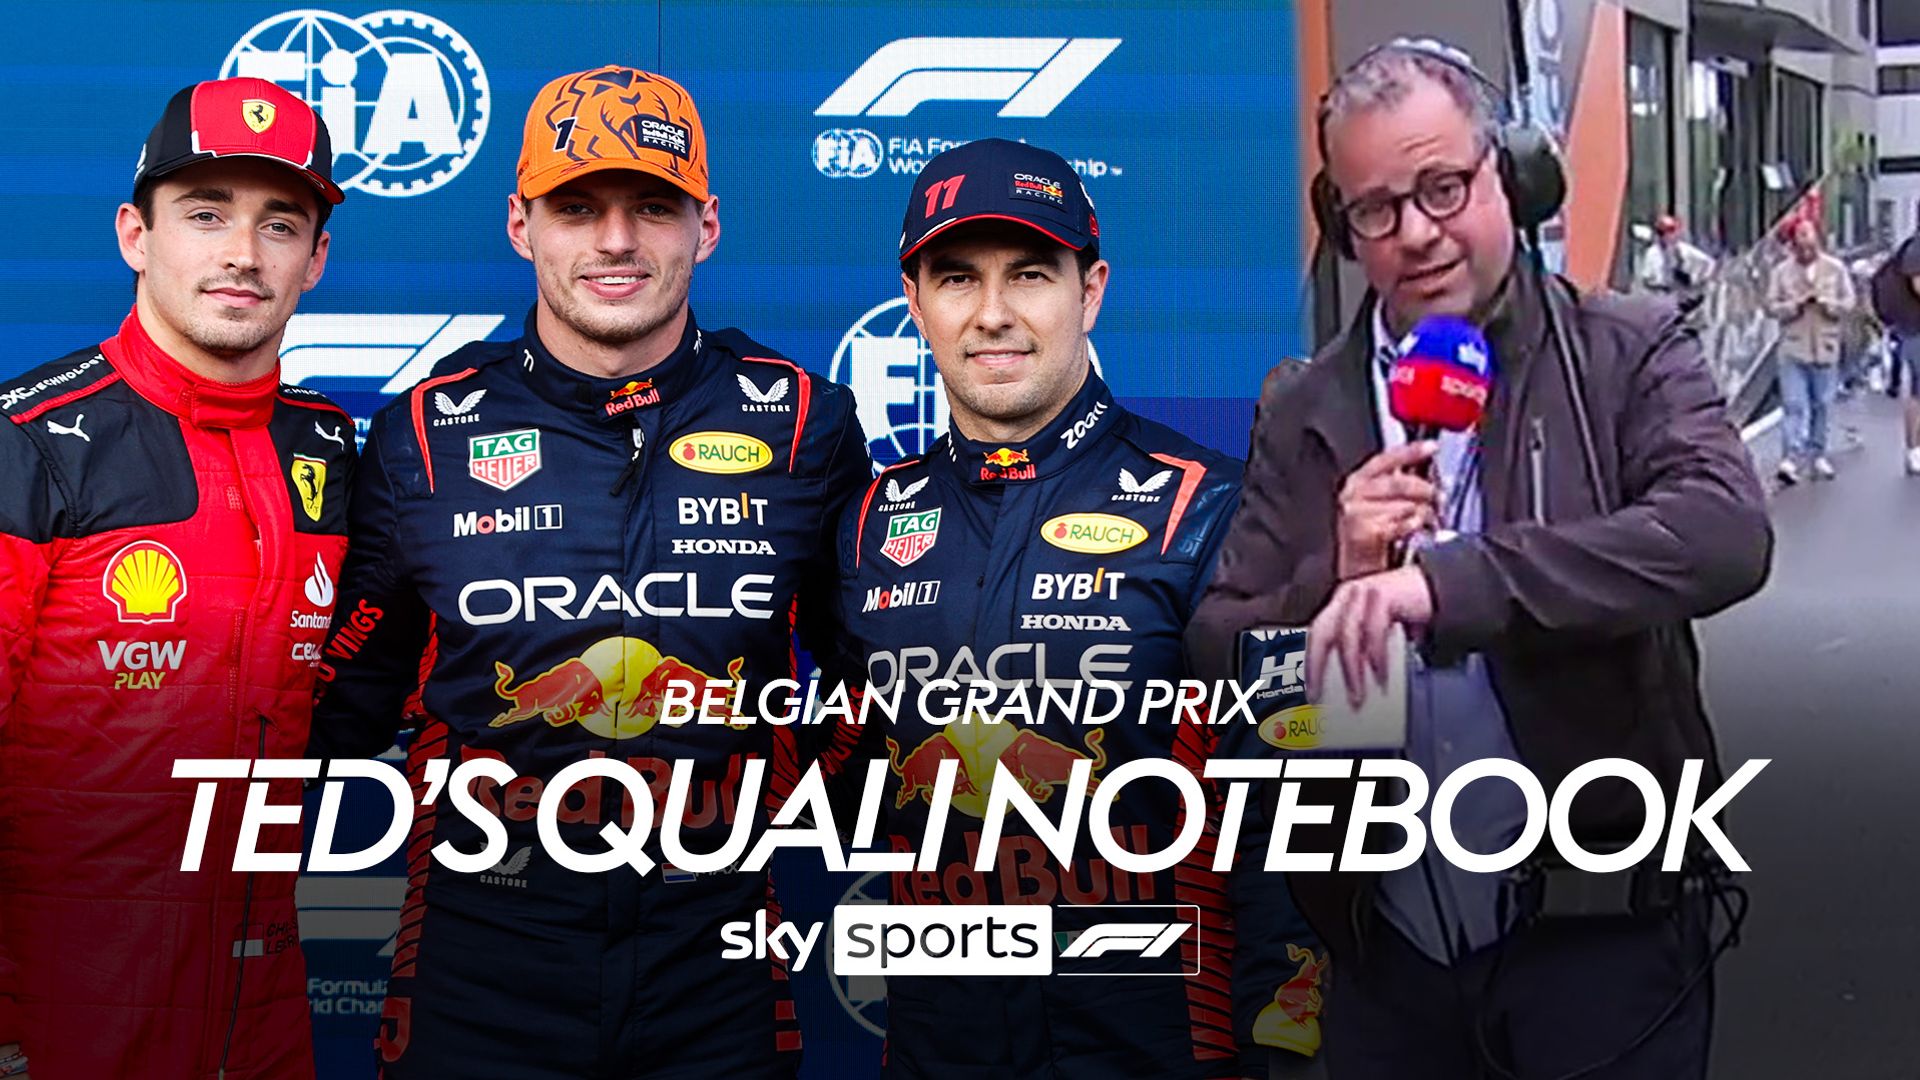 Ted's Qualifying Notebook | Belgian Grand Prix